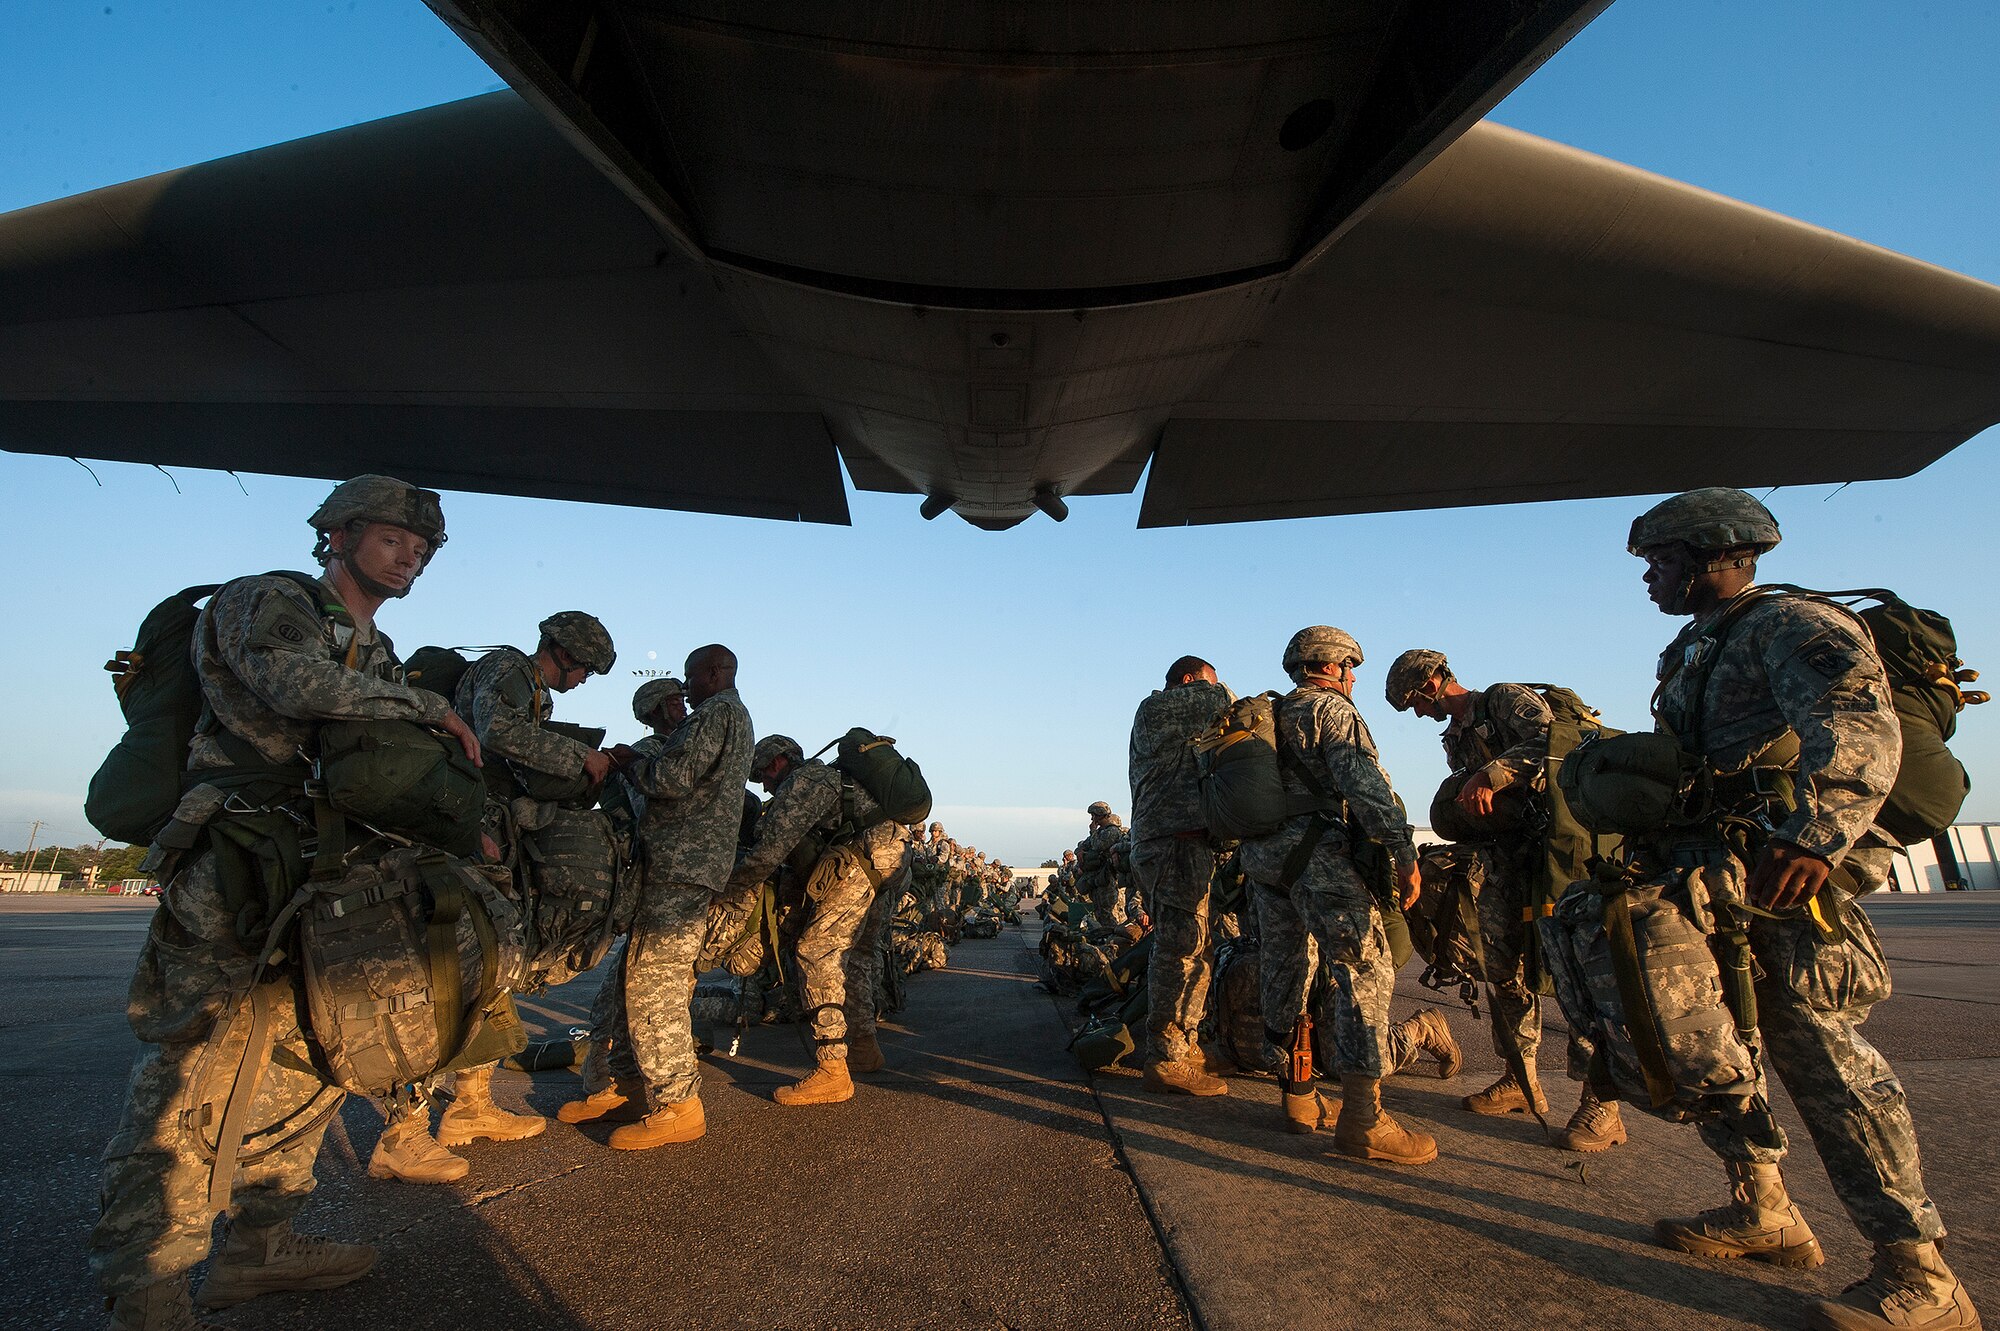 U.S. Army paratroopers from the 82nd Airborne Division perform an
equipment check before boarding a C-130H Aug. 18, 2013, at Alexandria
International Airport, La. The paratroopers were conducting a
static line drop that marked the beginning of Joint Operational Access
Exercise 13-0X. (U.S. Air Force photo by Staff Sgt. Russ Scalf)